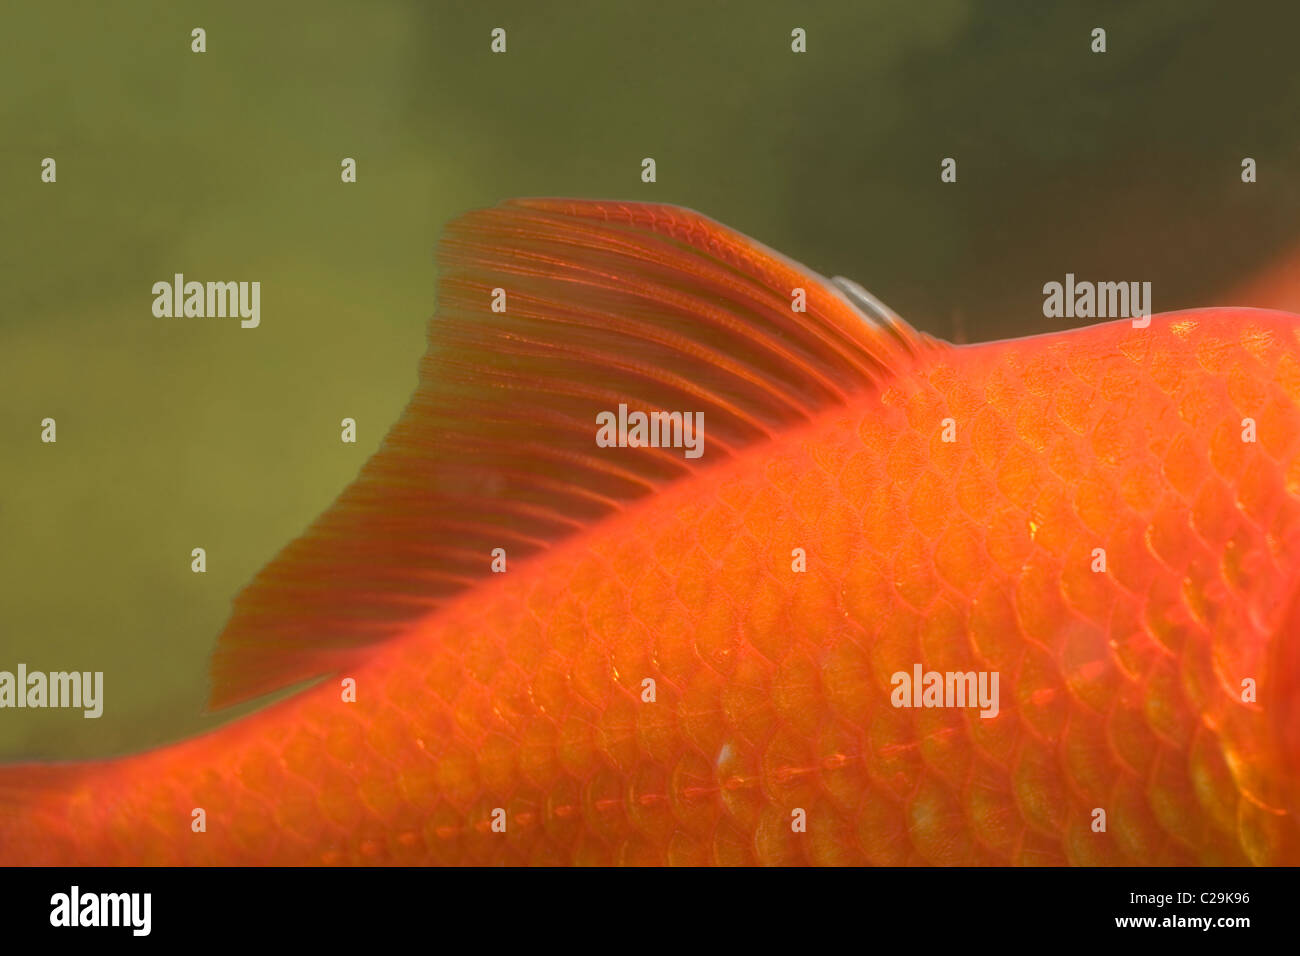 Goldfish Carassius auratus. Showing dorsal fin and lateral line running along length of body flank. Head end right. Stock Photo